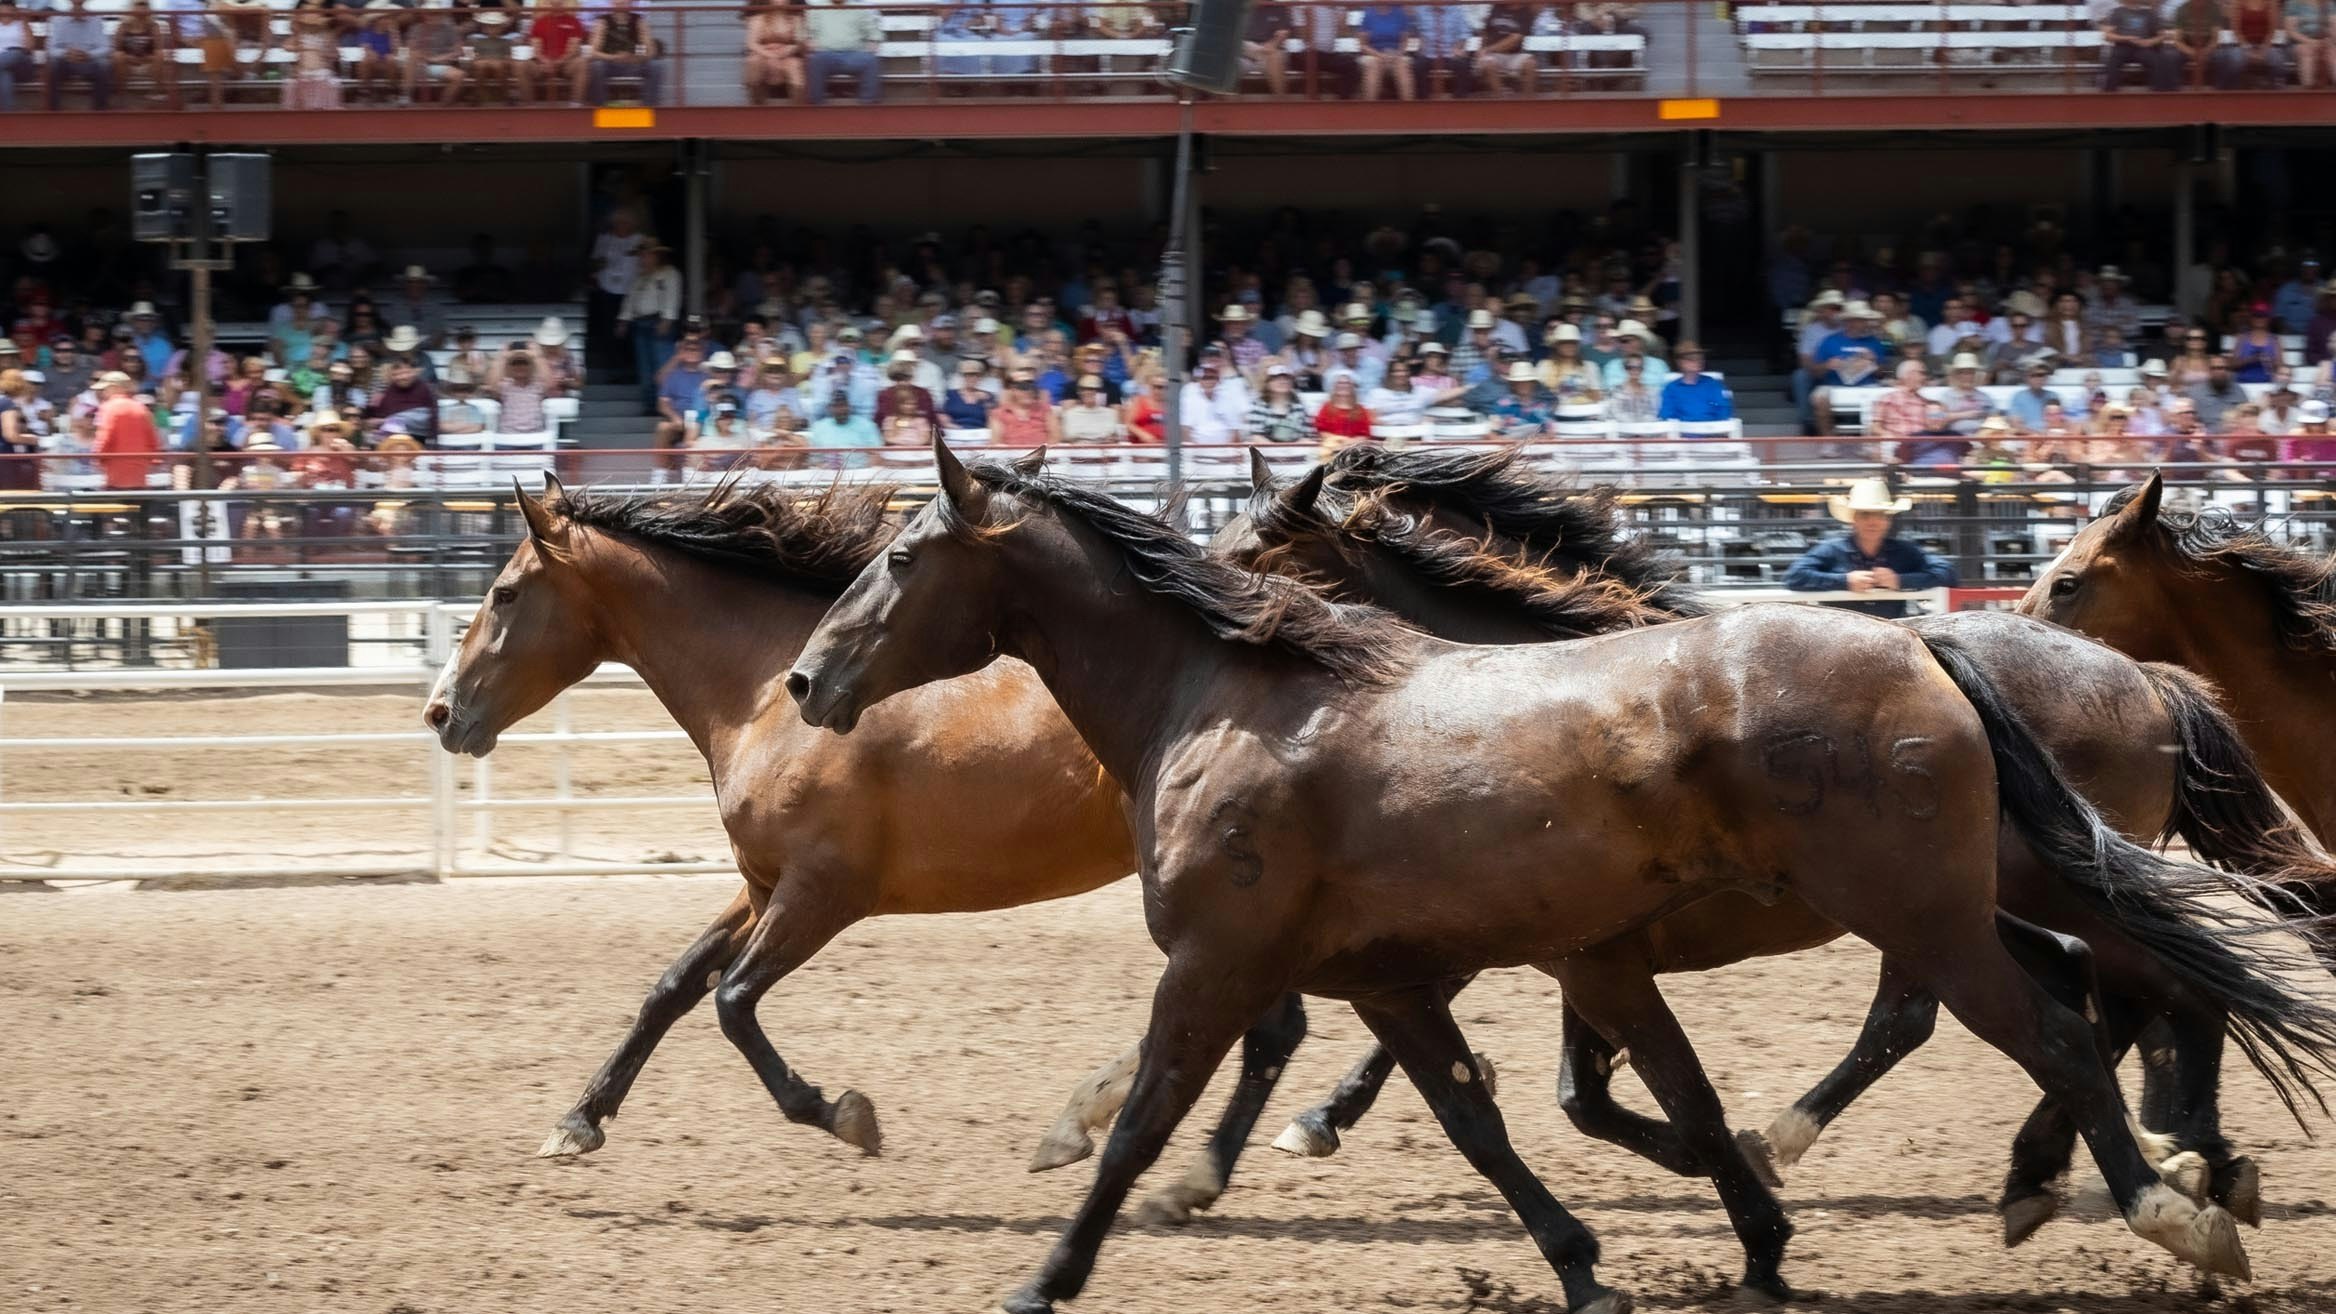 Bucking horses are ran around the arena at the start of the rodeo at Cheyenne Frontier Days on July 26, 2023.